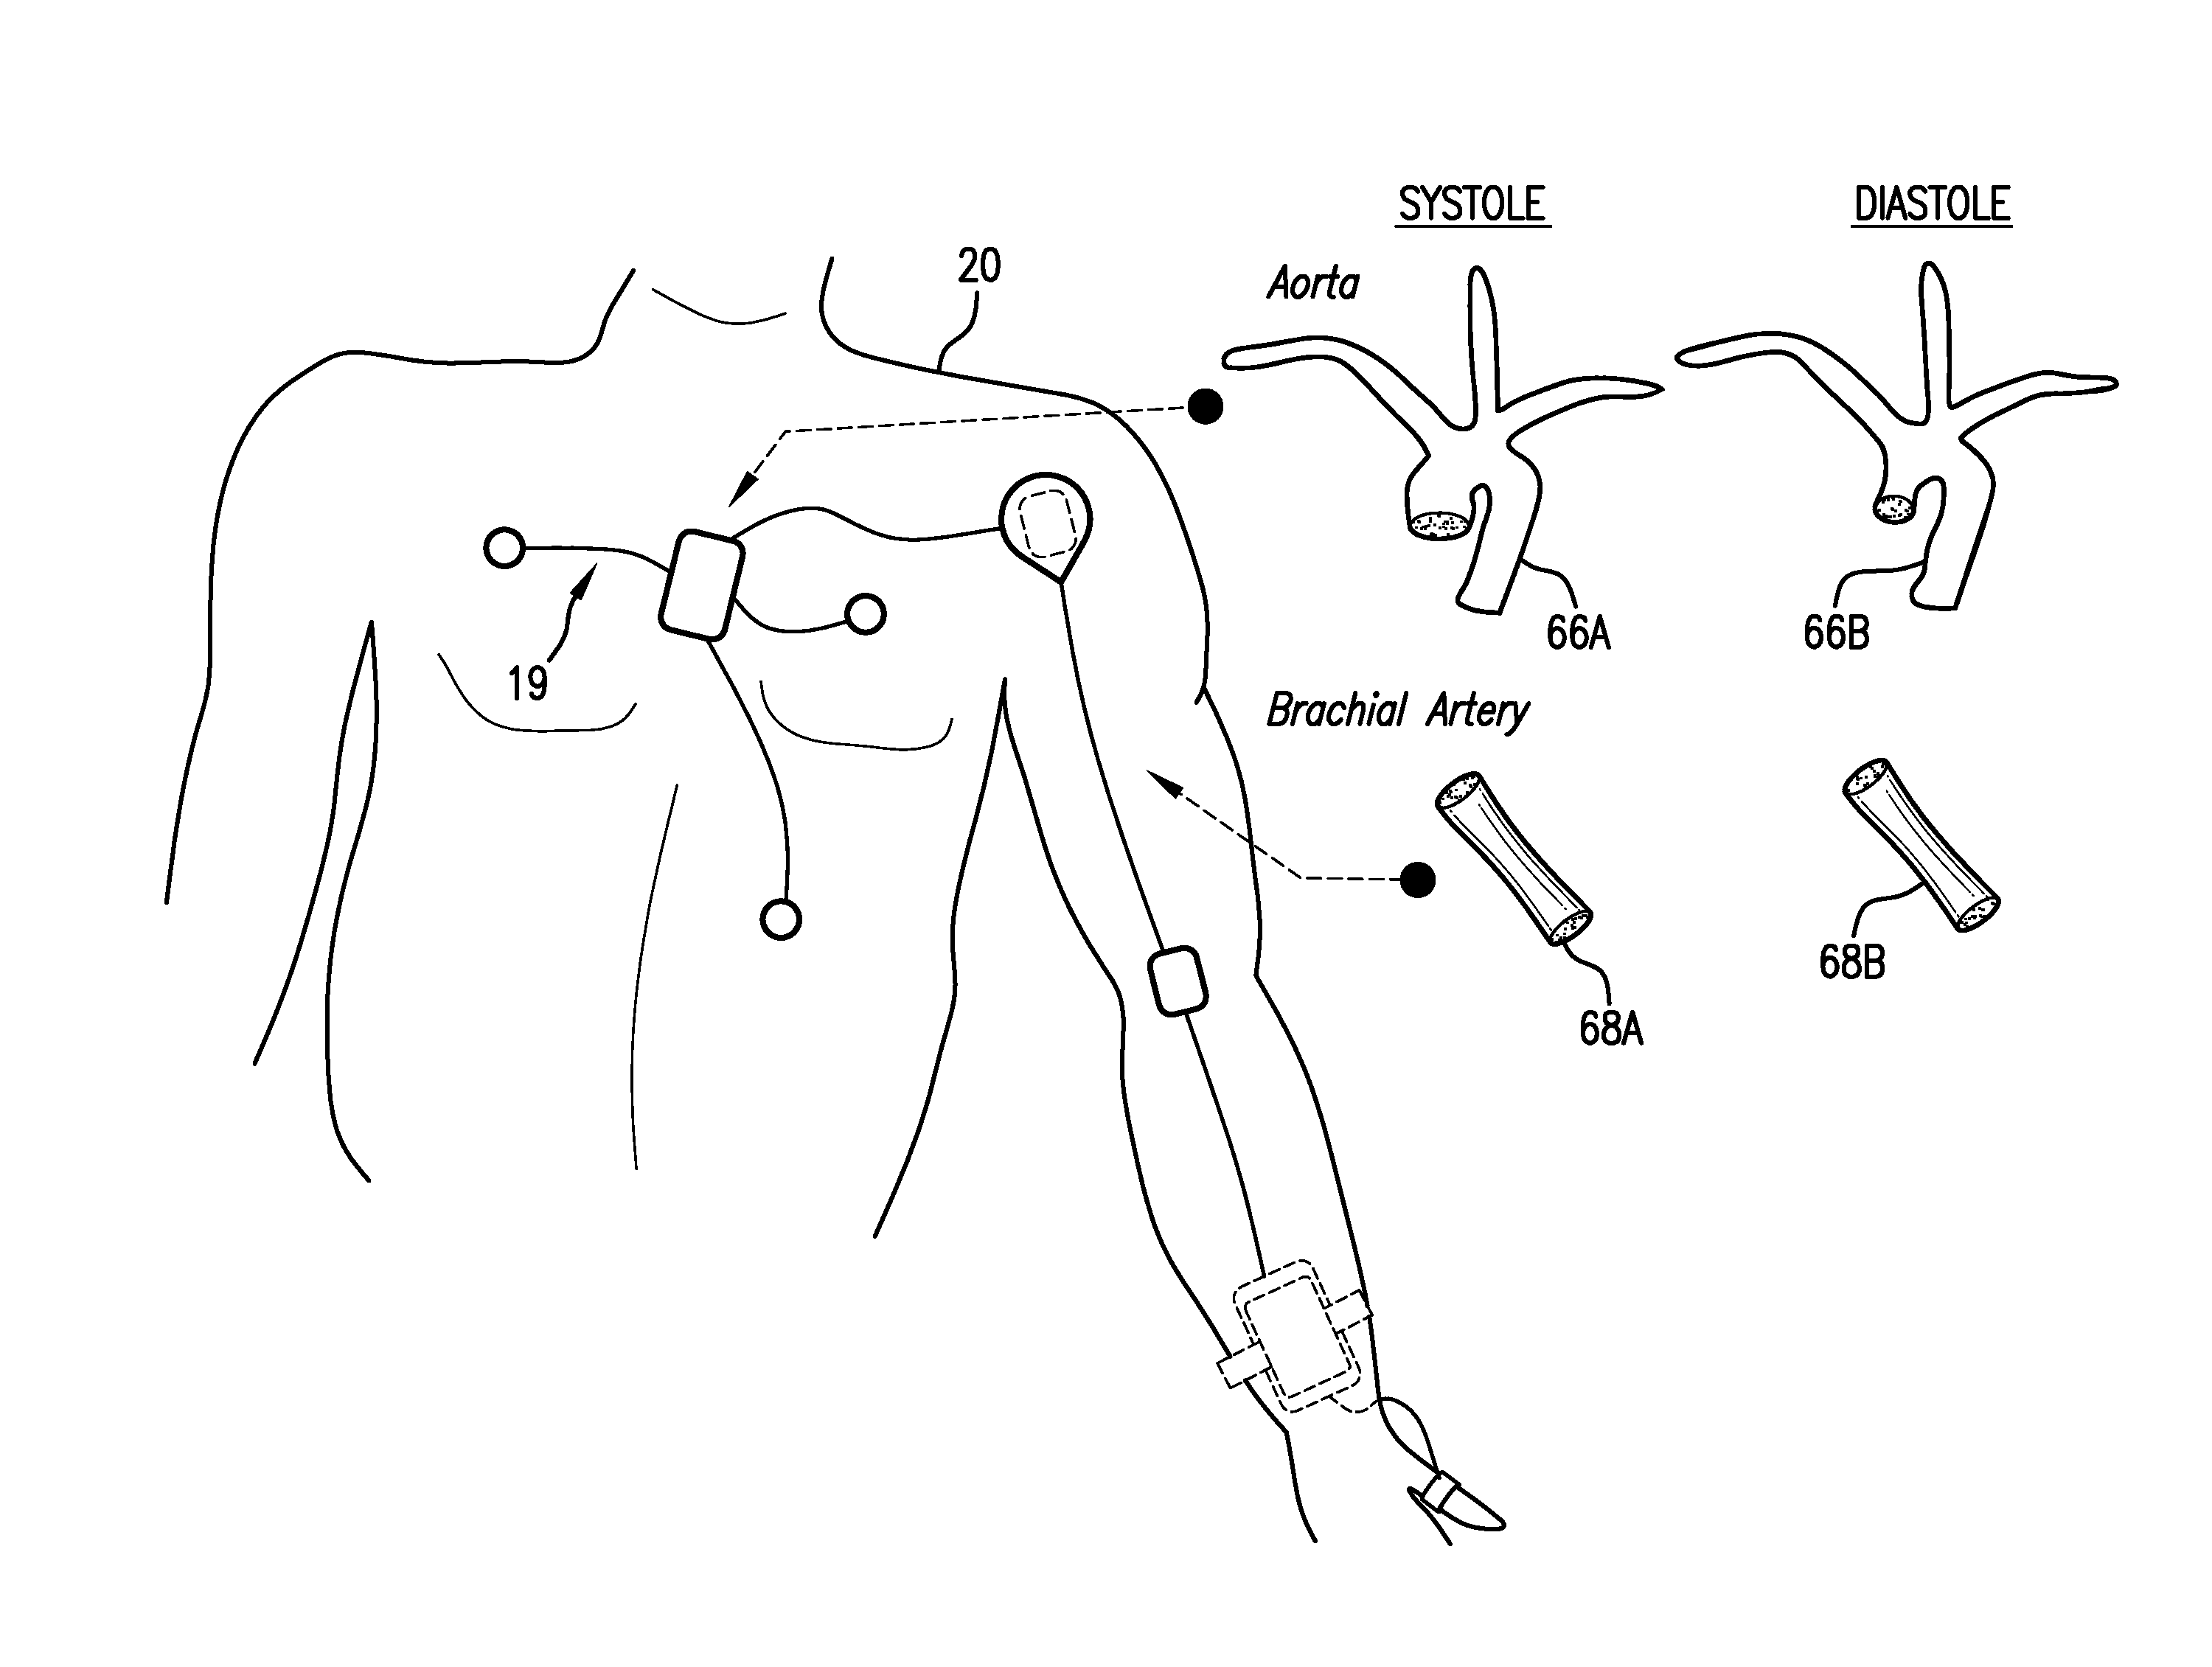 Body-worn system for continuous, noninvasive measurement of cardiac output, stroke volume, cardiac power, and blood pressure